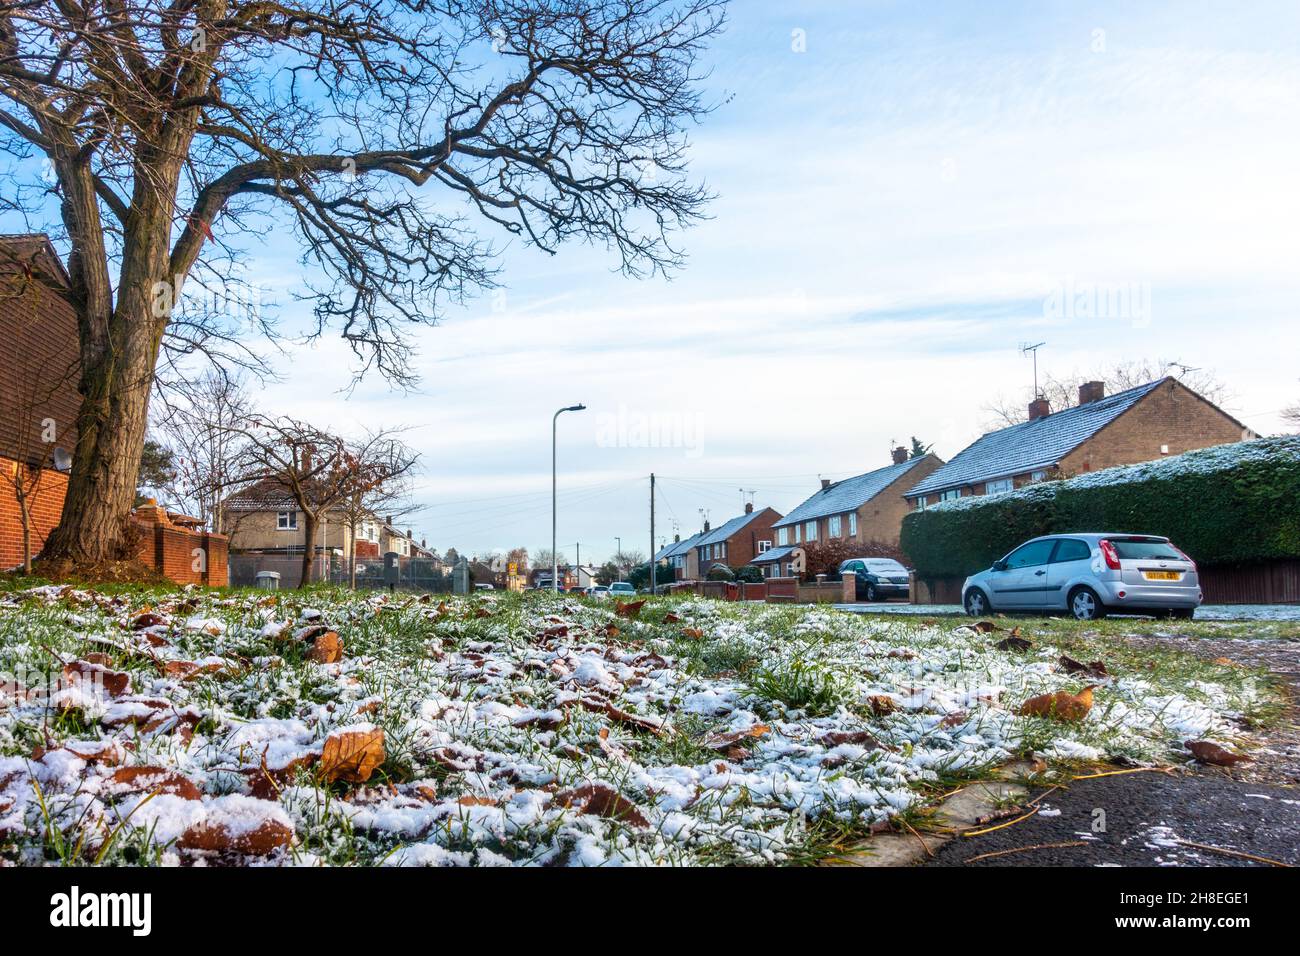 A low angle shot of grass and leaves covered in a light covering of snow in Tilehurst, Reading, UK. Stock Photo